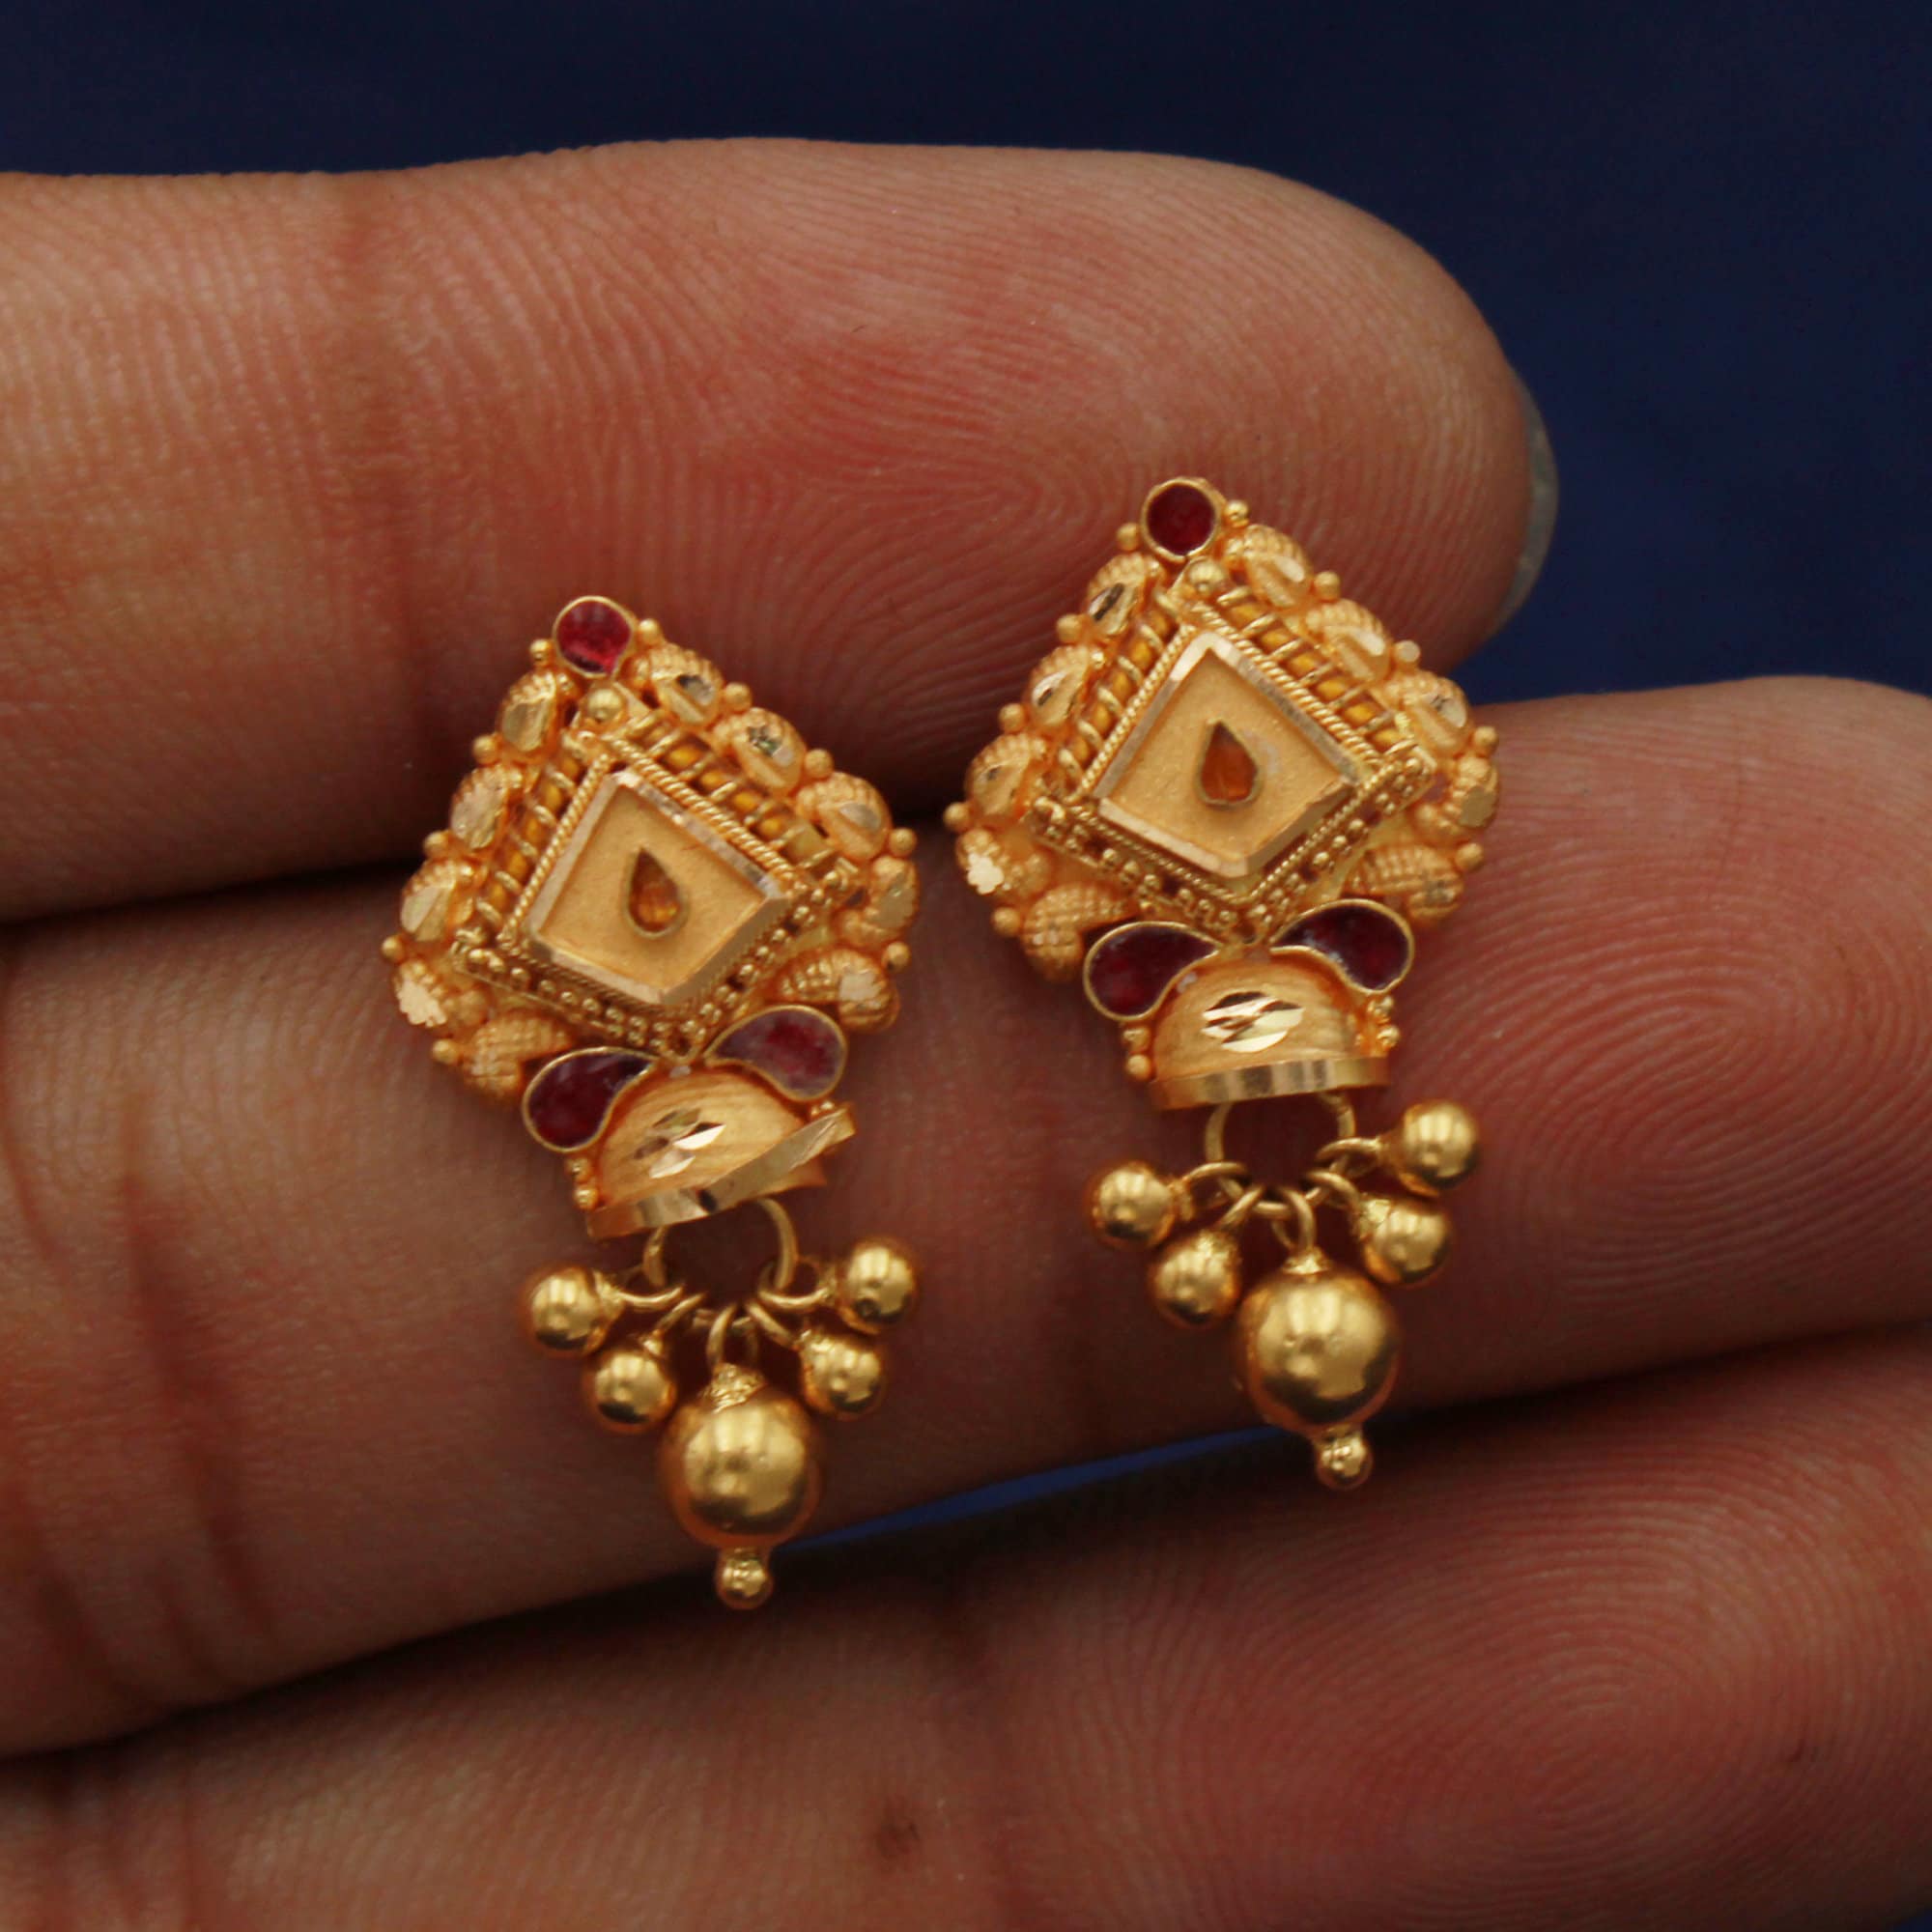 22Kt gold earrings with vibrant stones  Gold earrings designs Gold jewelry  fashion Antique gold earrings